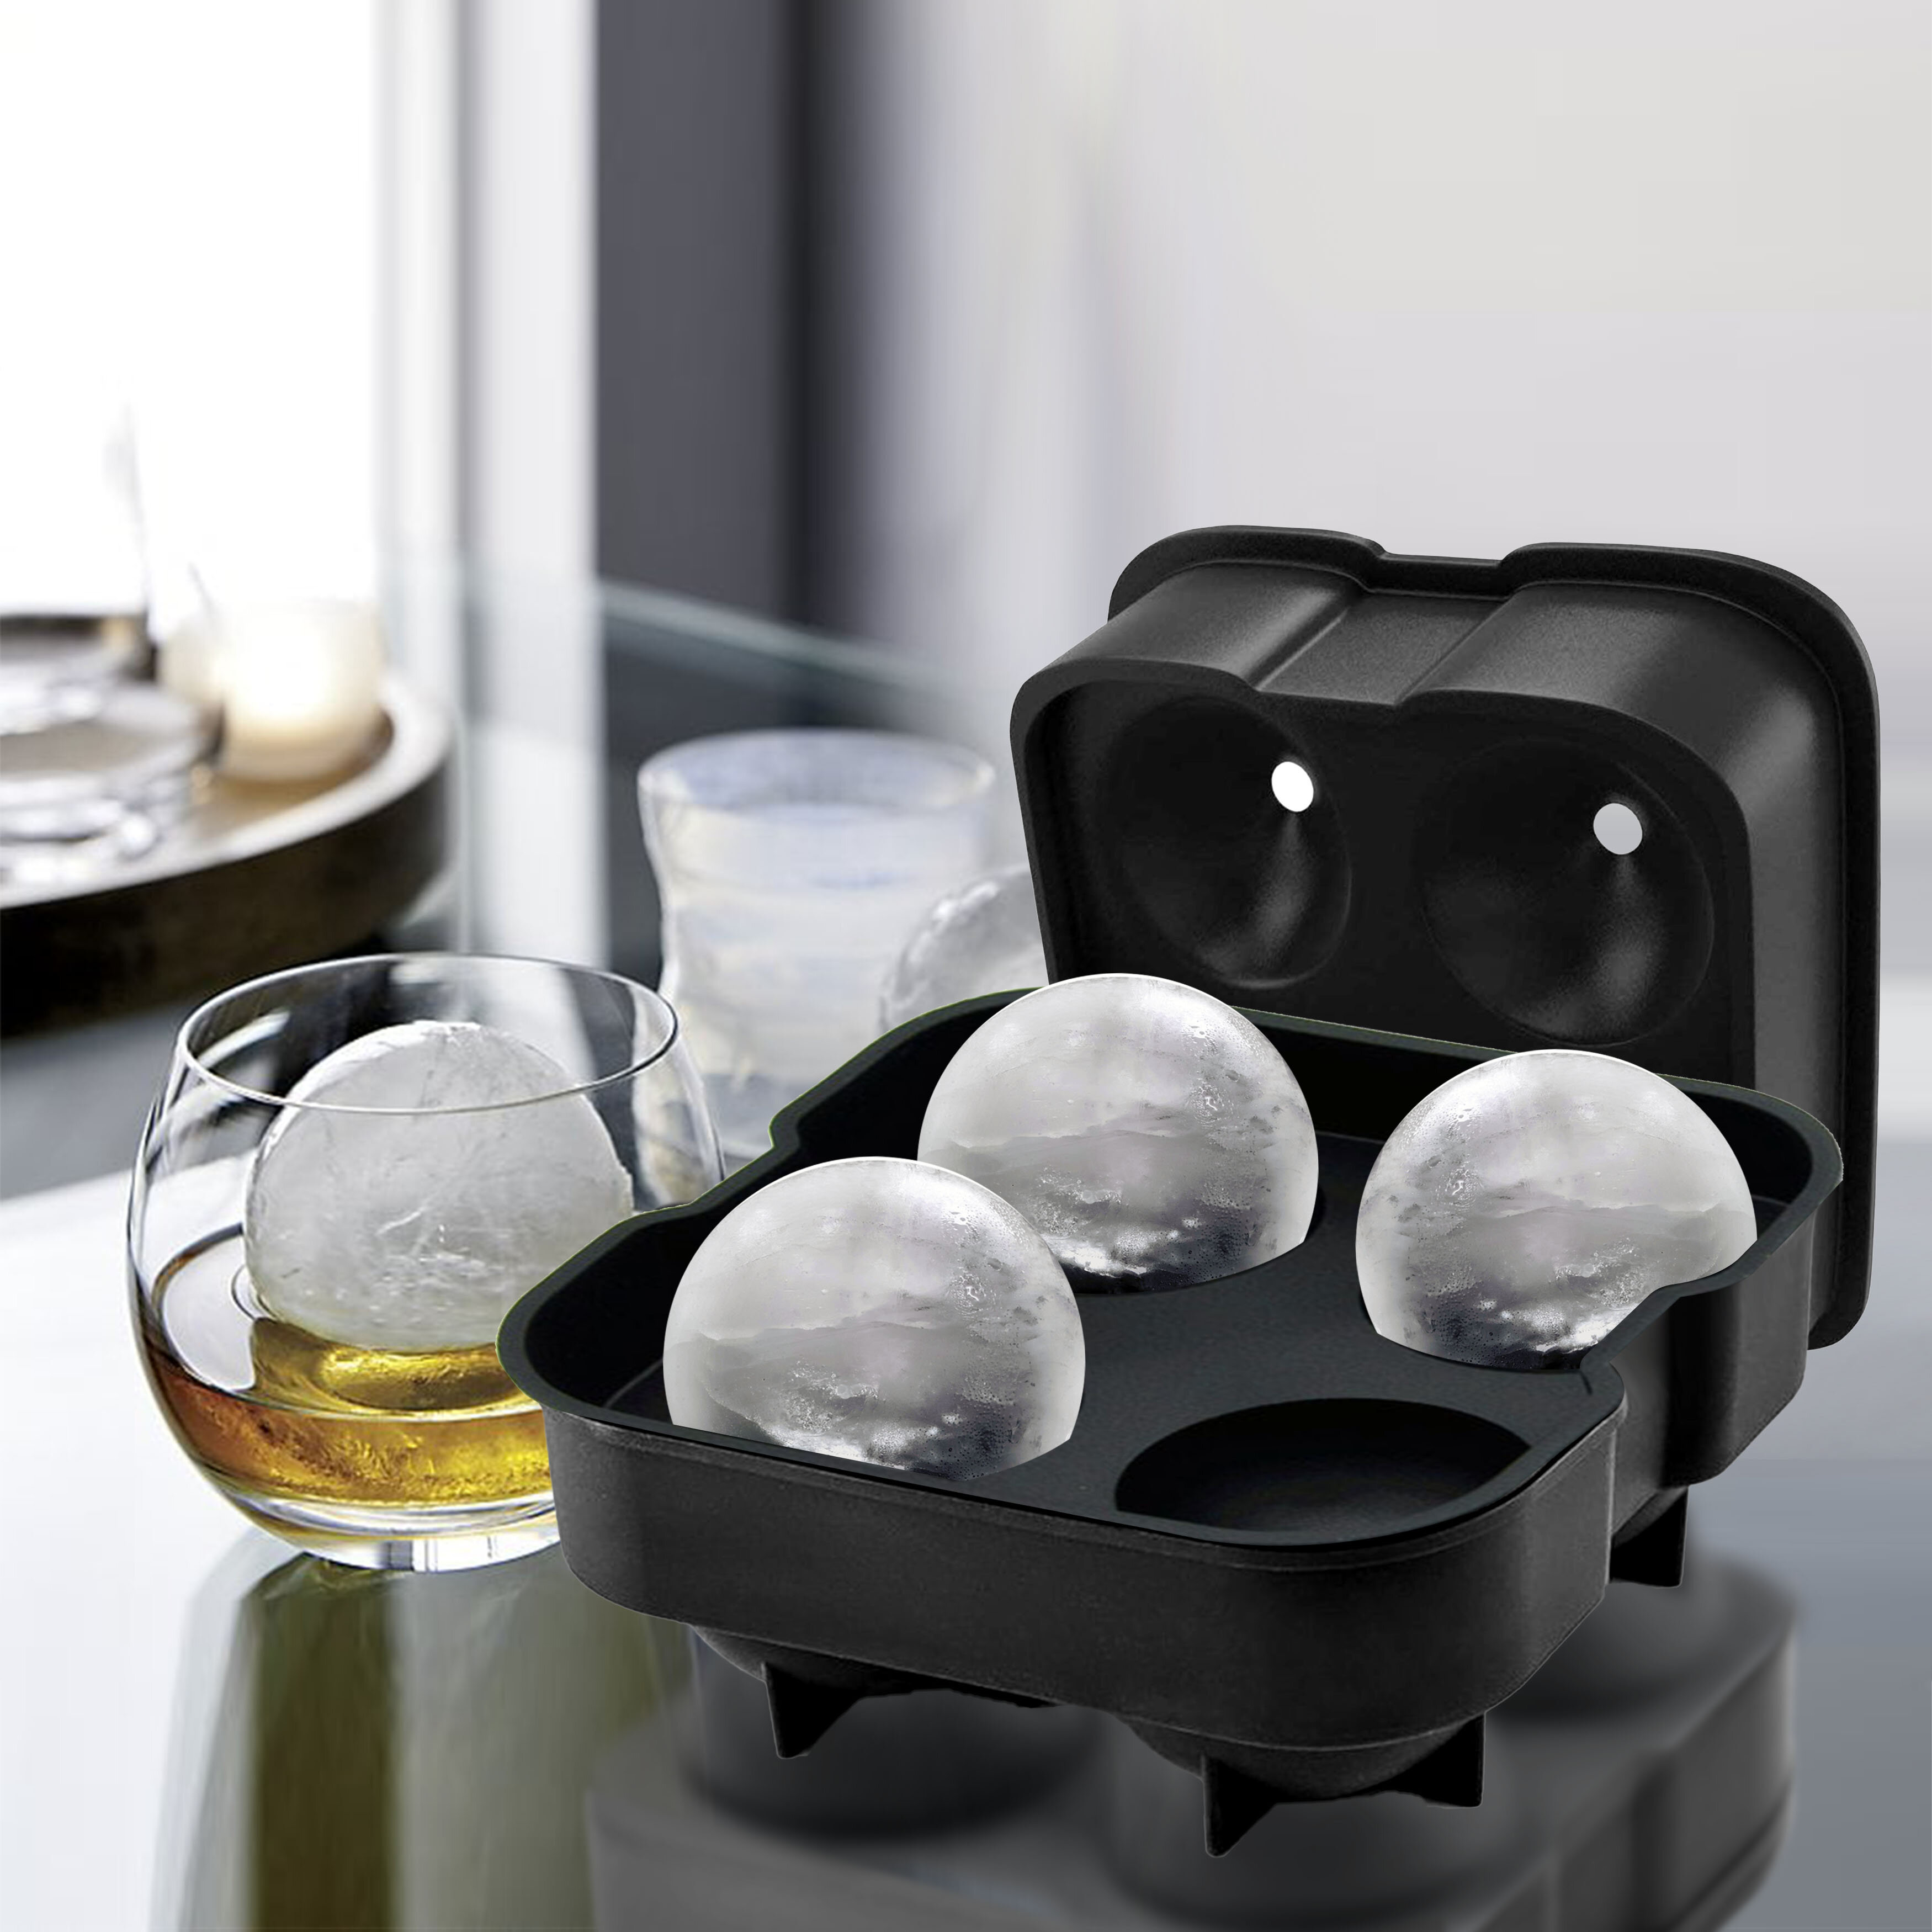 Ice Cube Tray, 6 Large Rose Ice Balls 1.8'' Easy Release Silicone Ice Cube  Mold for Cocktails, Drinks, Whiskey, Bourbon & Homemade Juice (Orange)